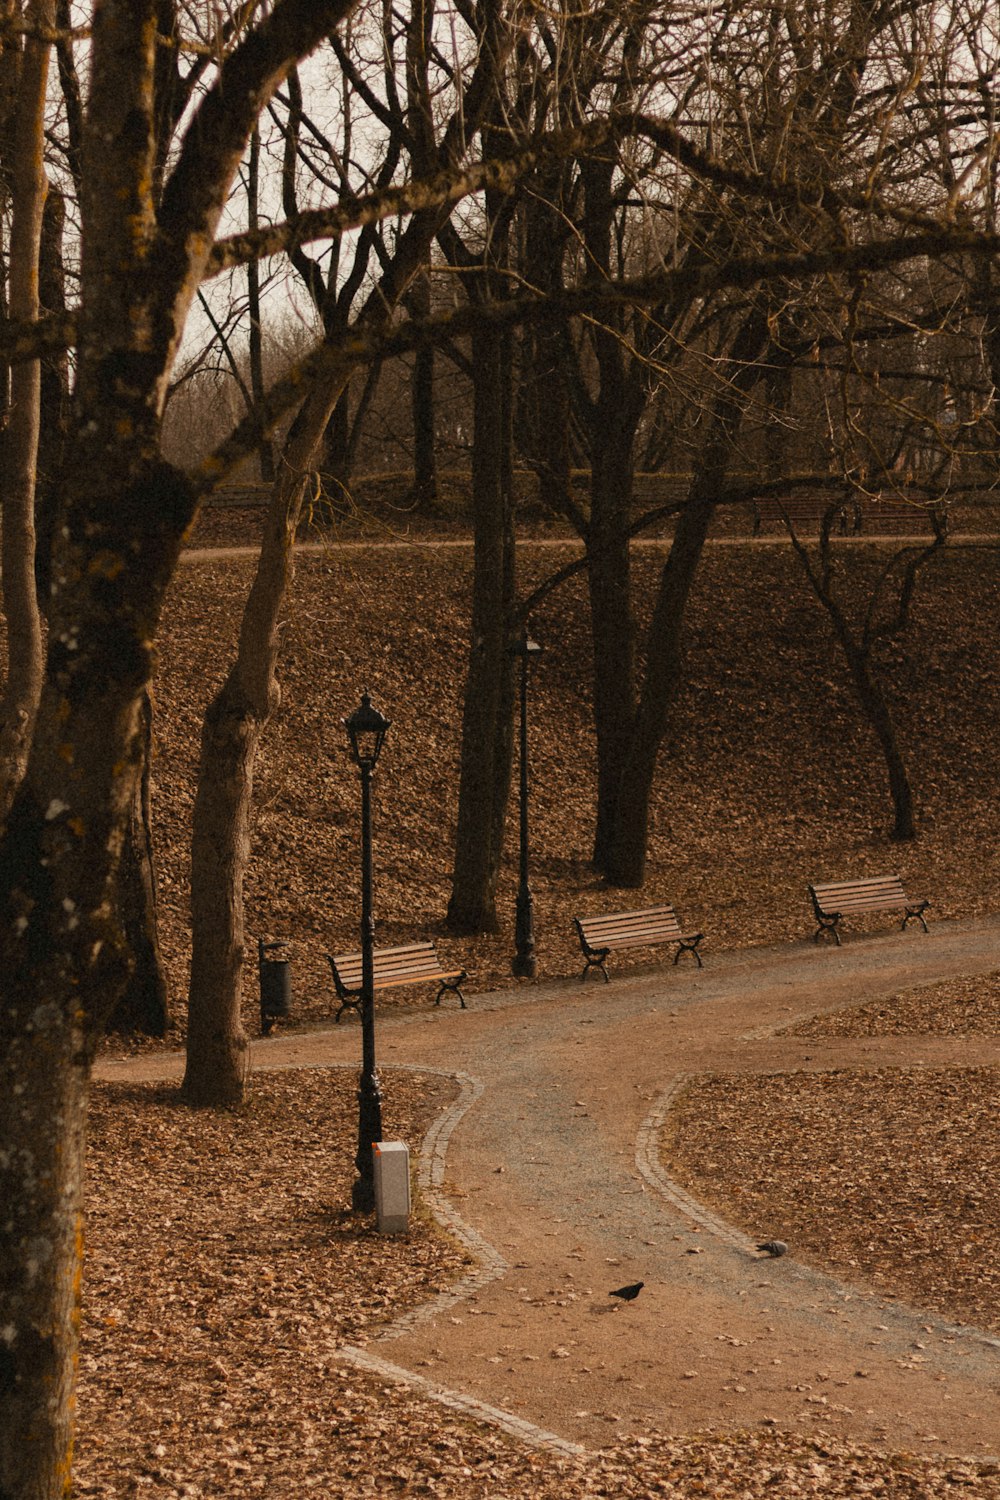 a path in a park with benches and trees